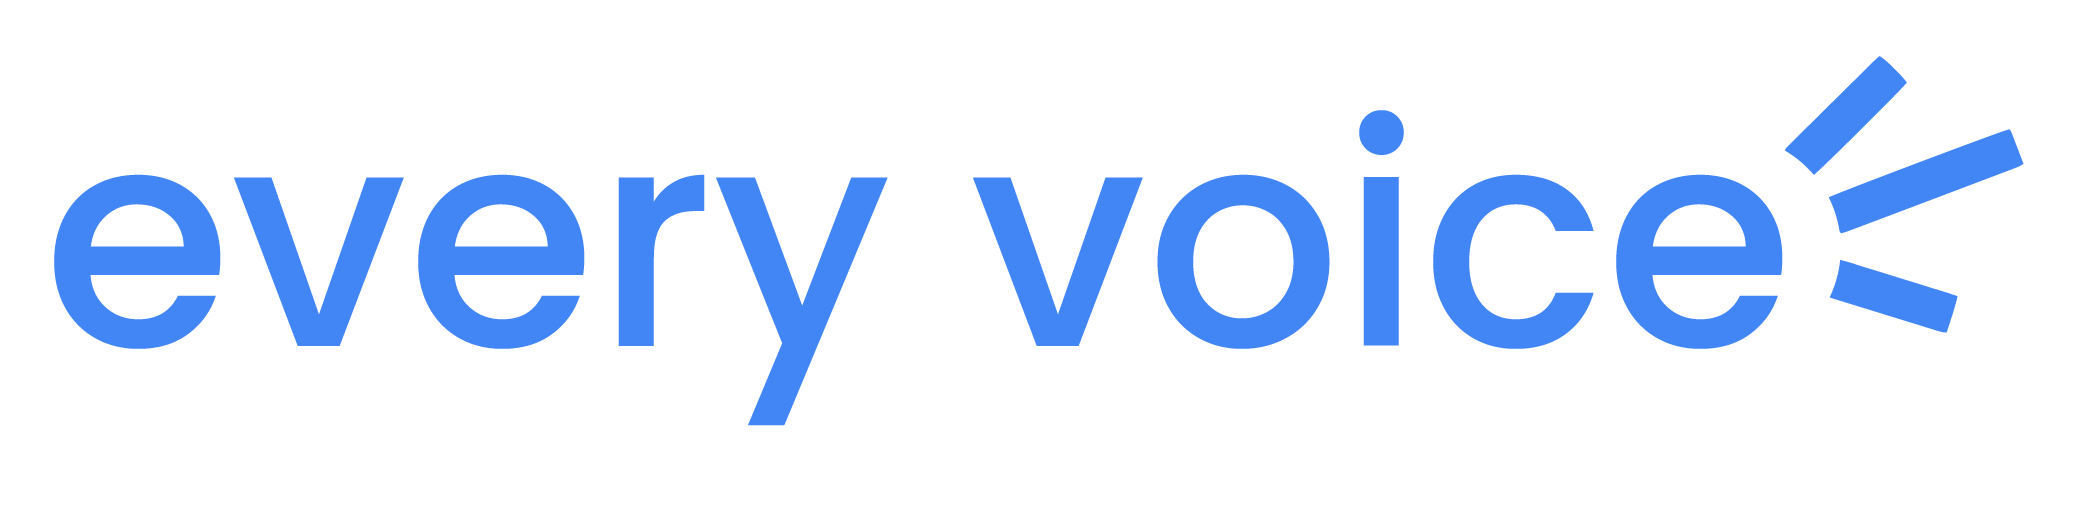 everyvoice-logo-blue.png